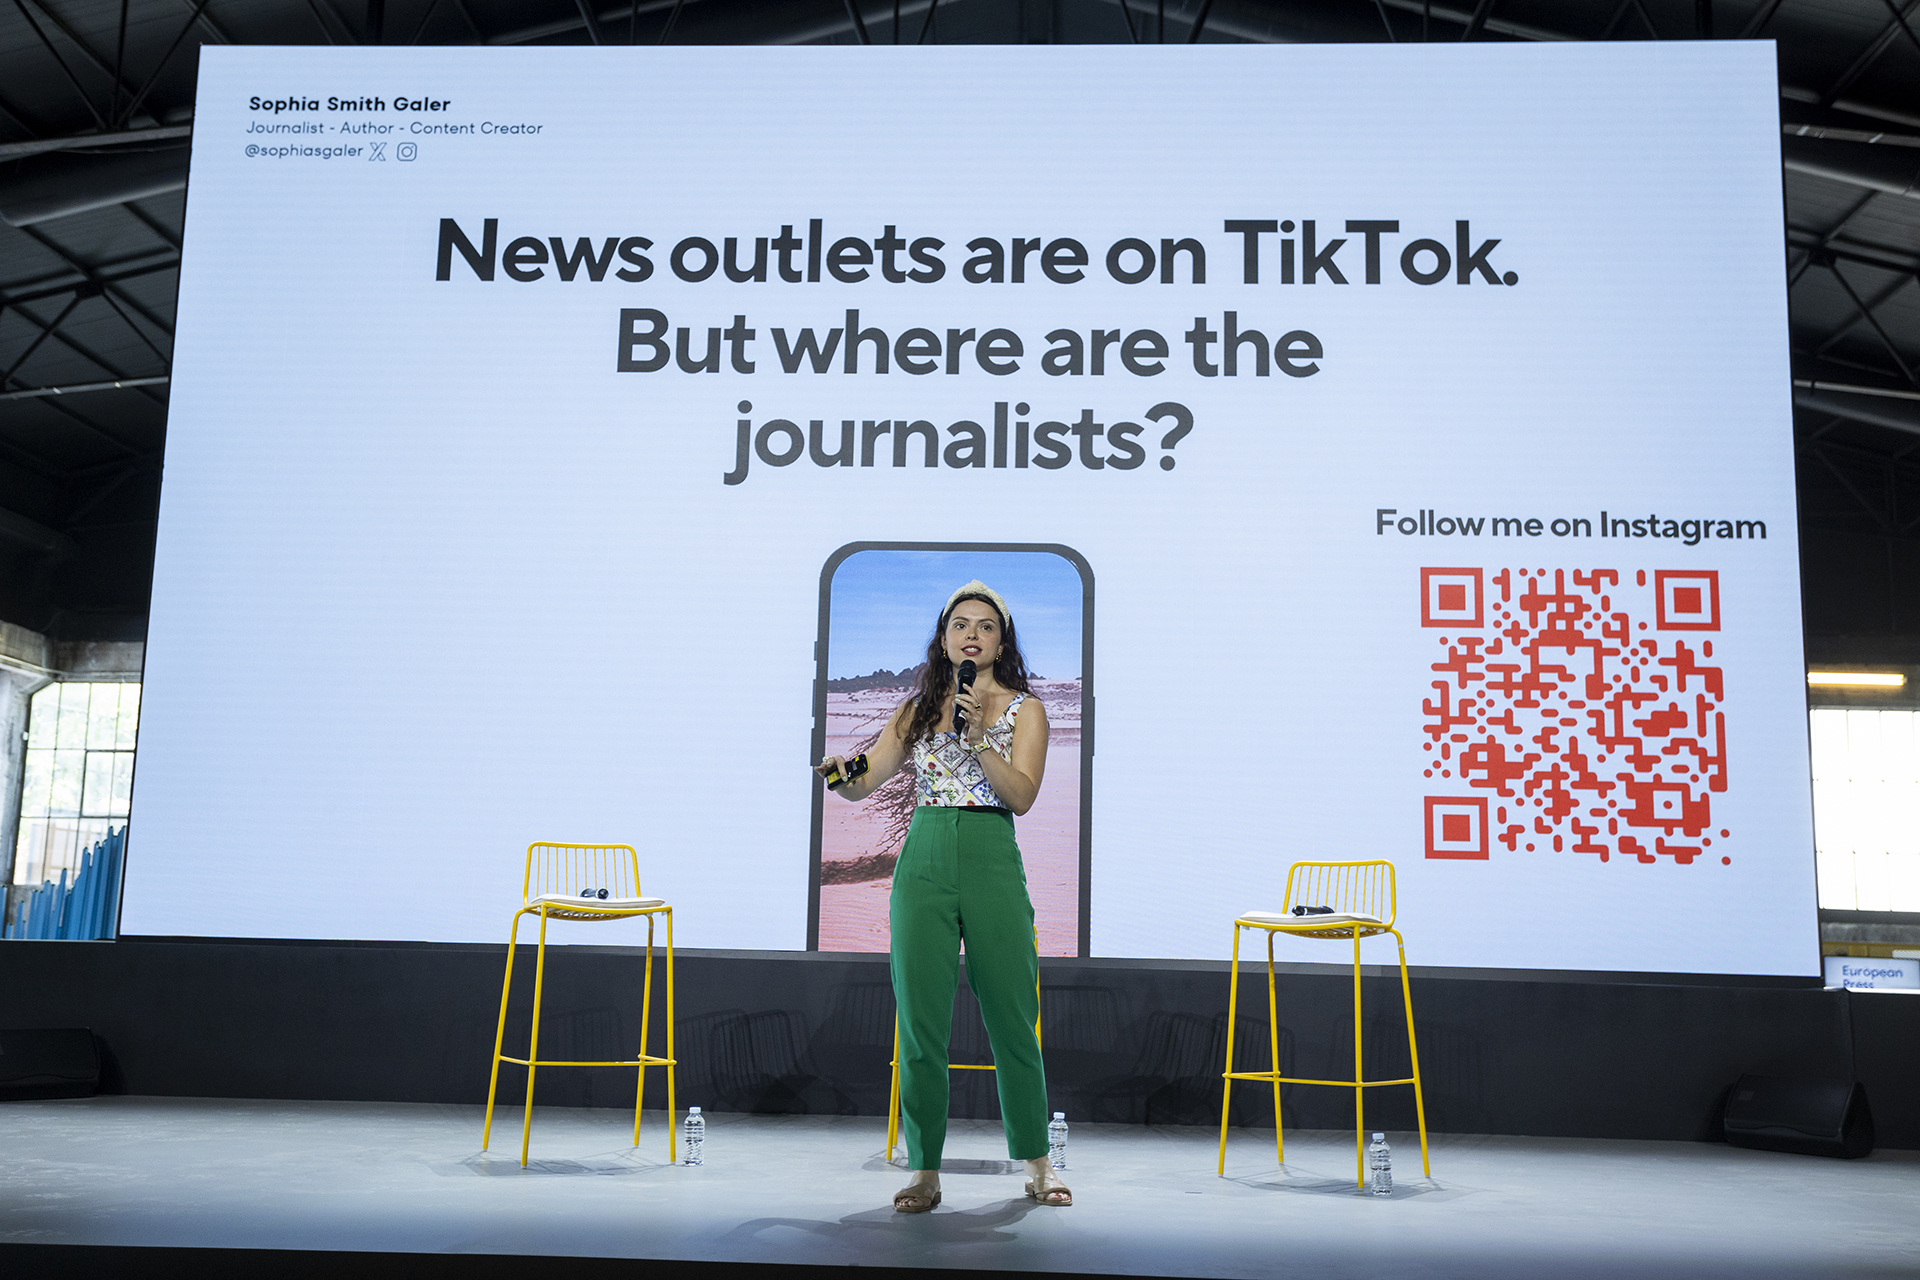 Sophia Smith Galler in her keynote speech "News brands are on TikTok - but where are the journalists?" She is standing at the center of the stage wearing dark green trousers, a flower top, and a hairband. Her background shows the title of her speech and a QR code that leads to her Instagram account.